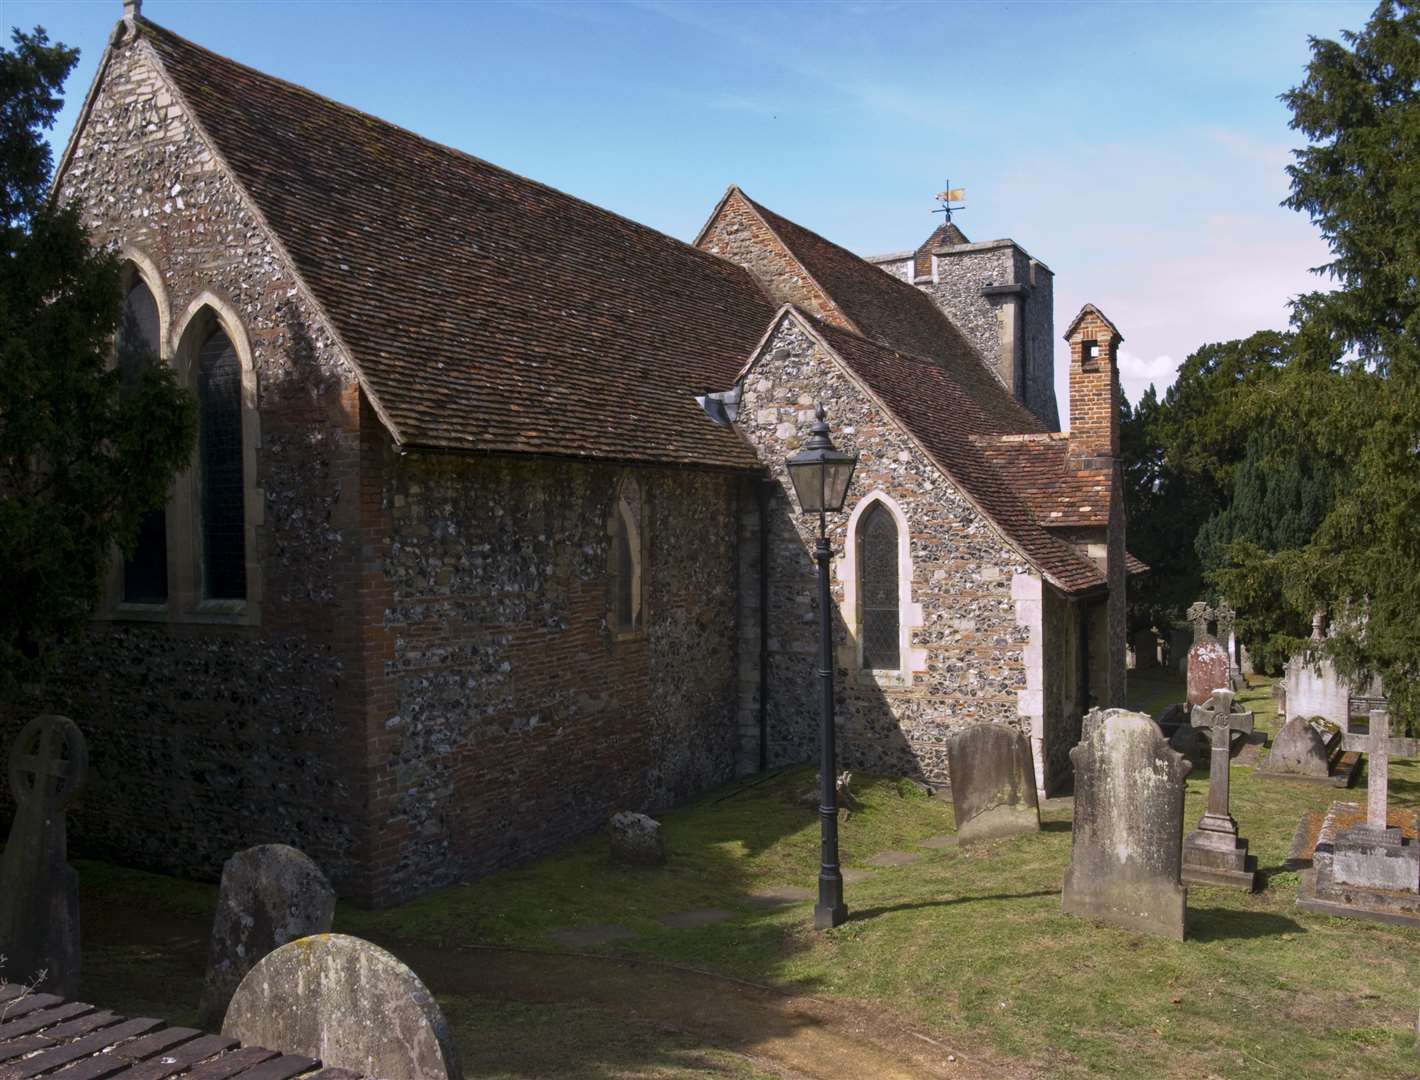 St Martin's Church makes up part of the World Heritage site